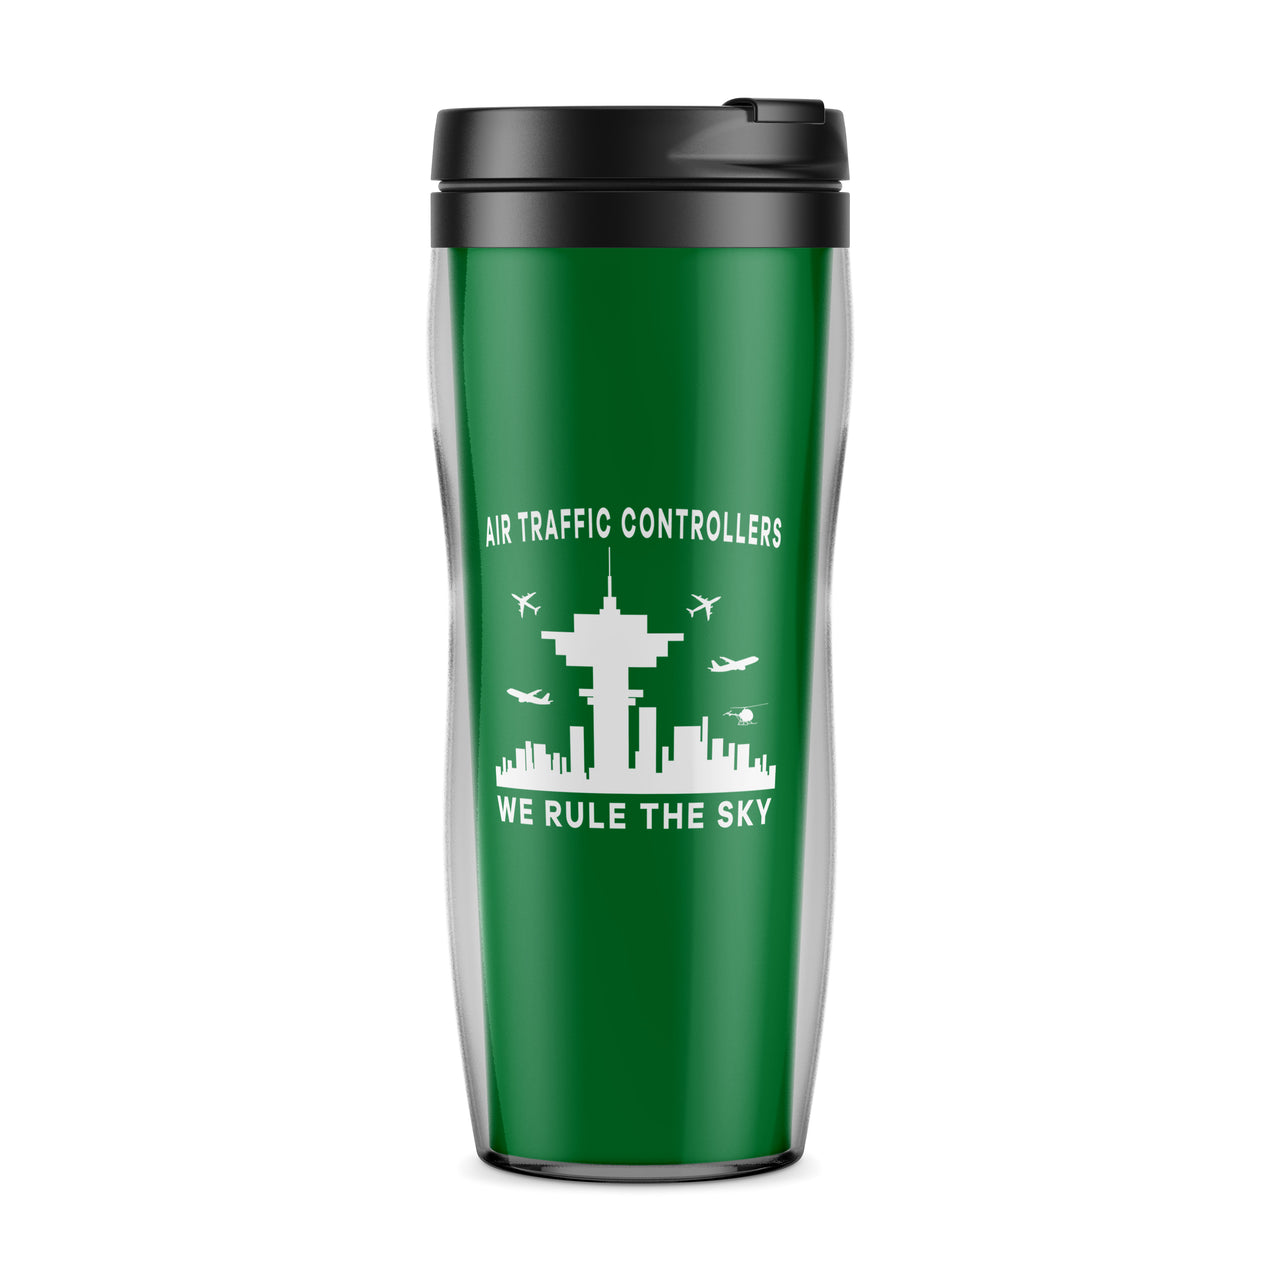 Air Traffic Controllers - We Rule The Sky Designed Plastic Travel Mugs